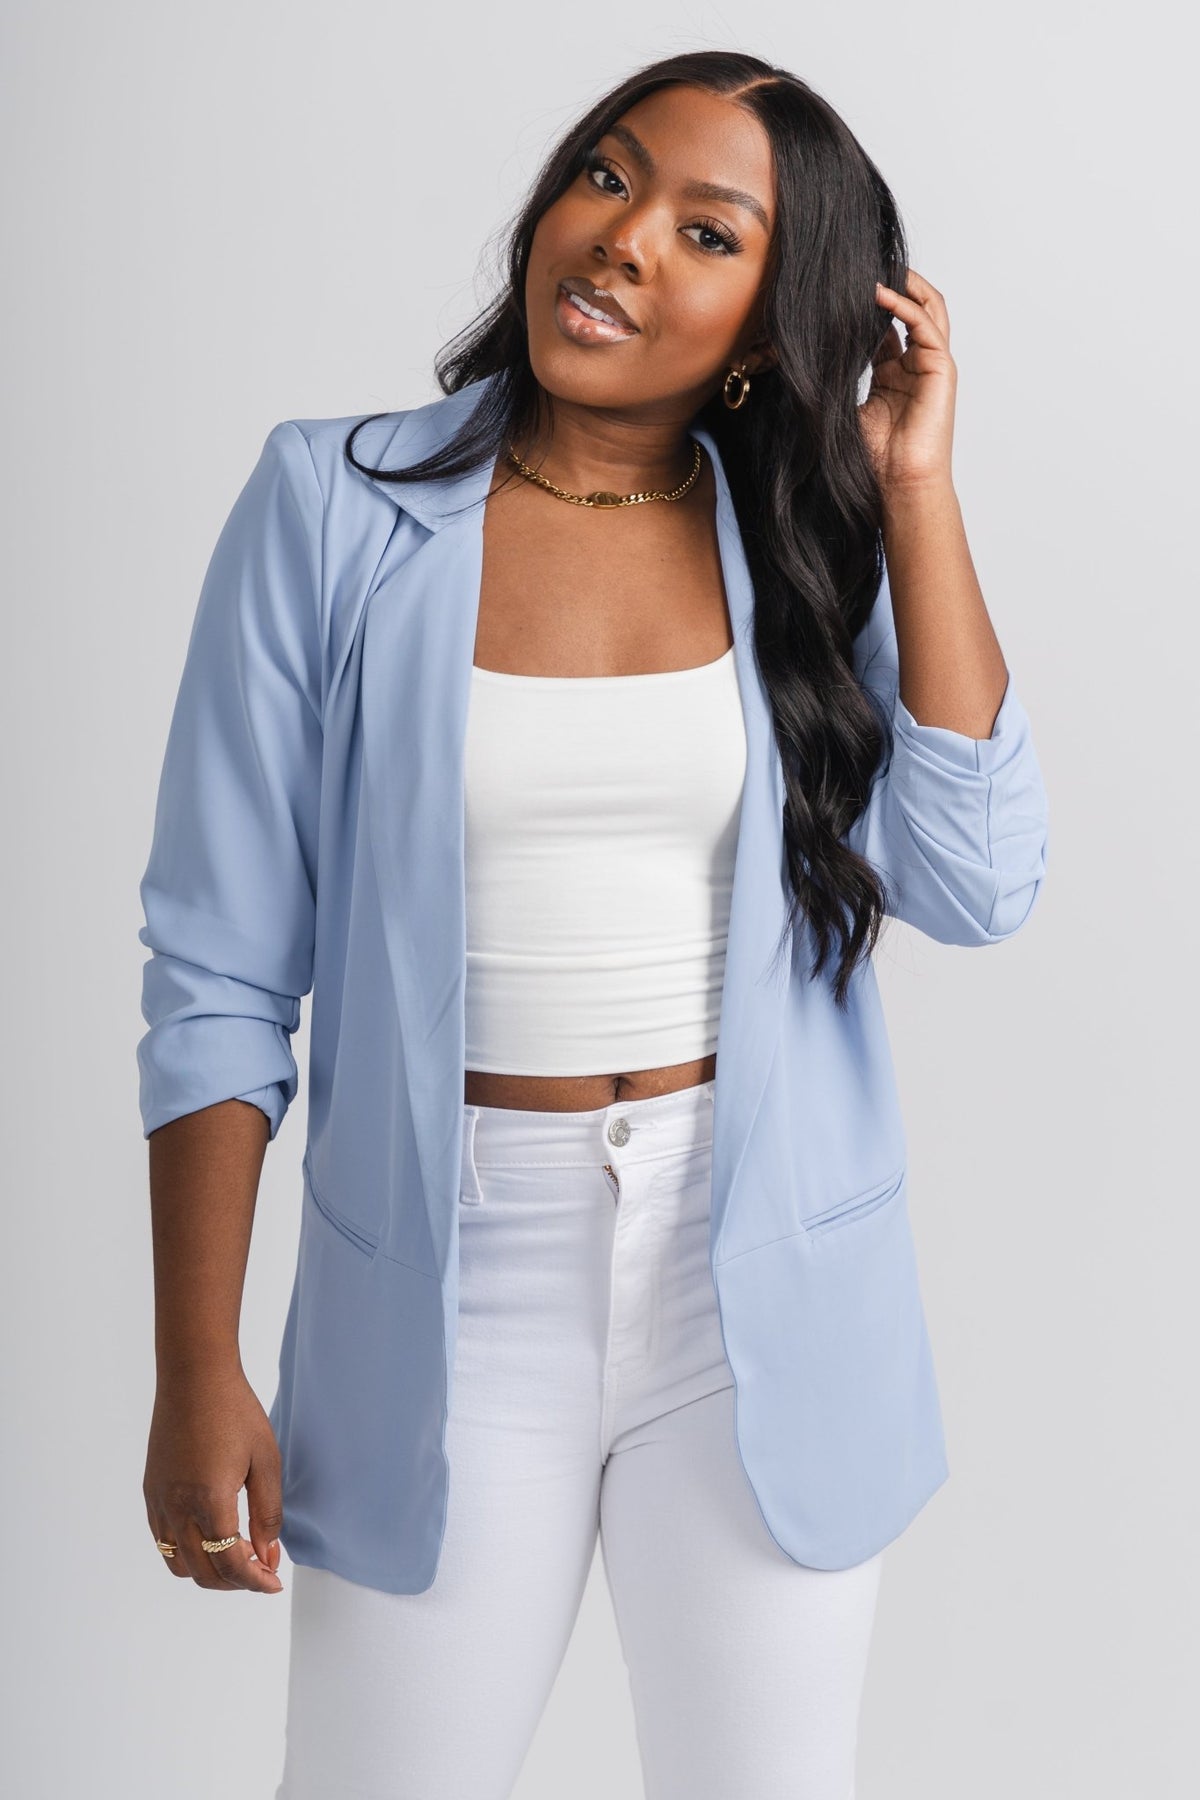 Ruched sleeve blazer blue - Stylish Blazer - Cute Easter Outfits at Lush Fashion Lounge Boutique in Oklahoma